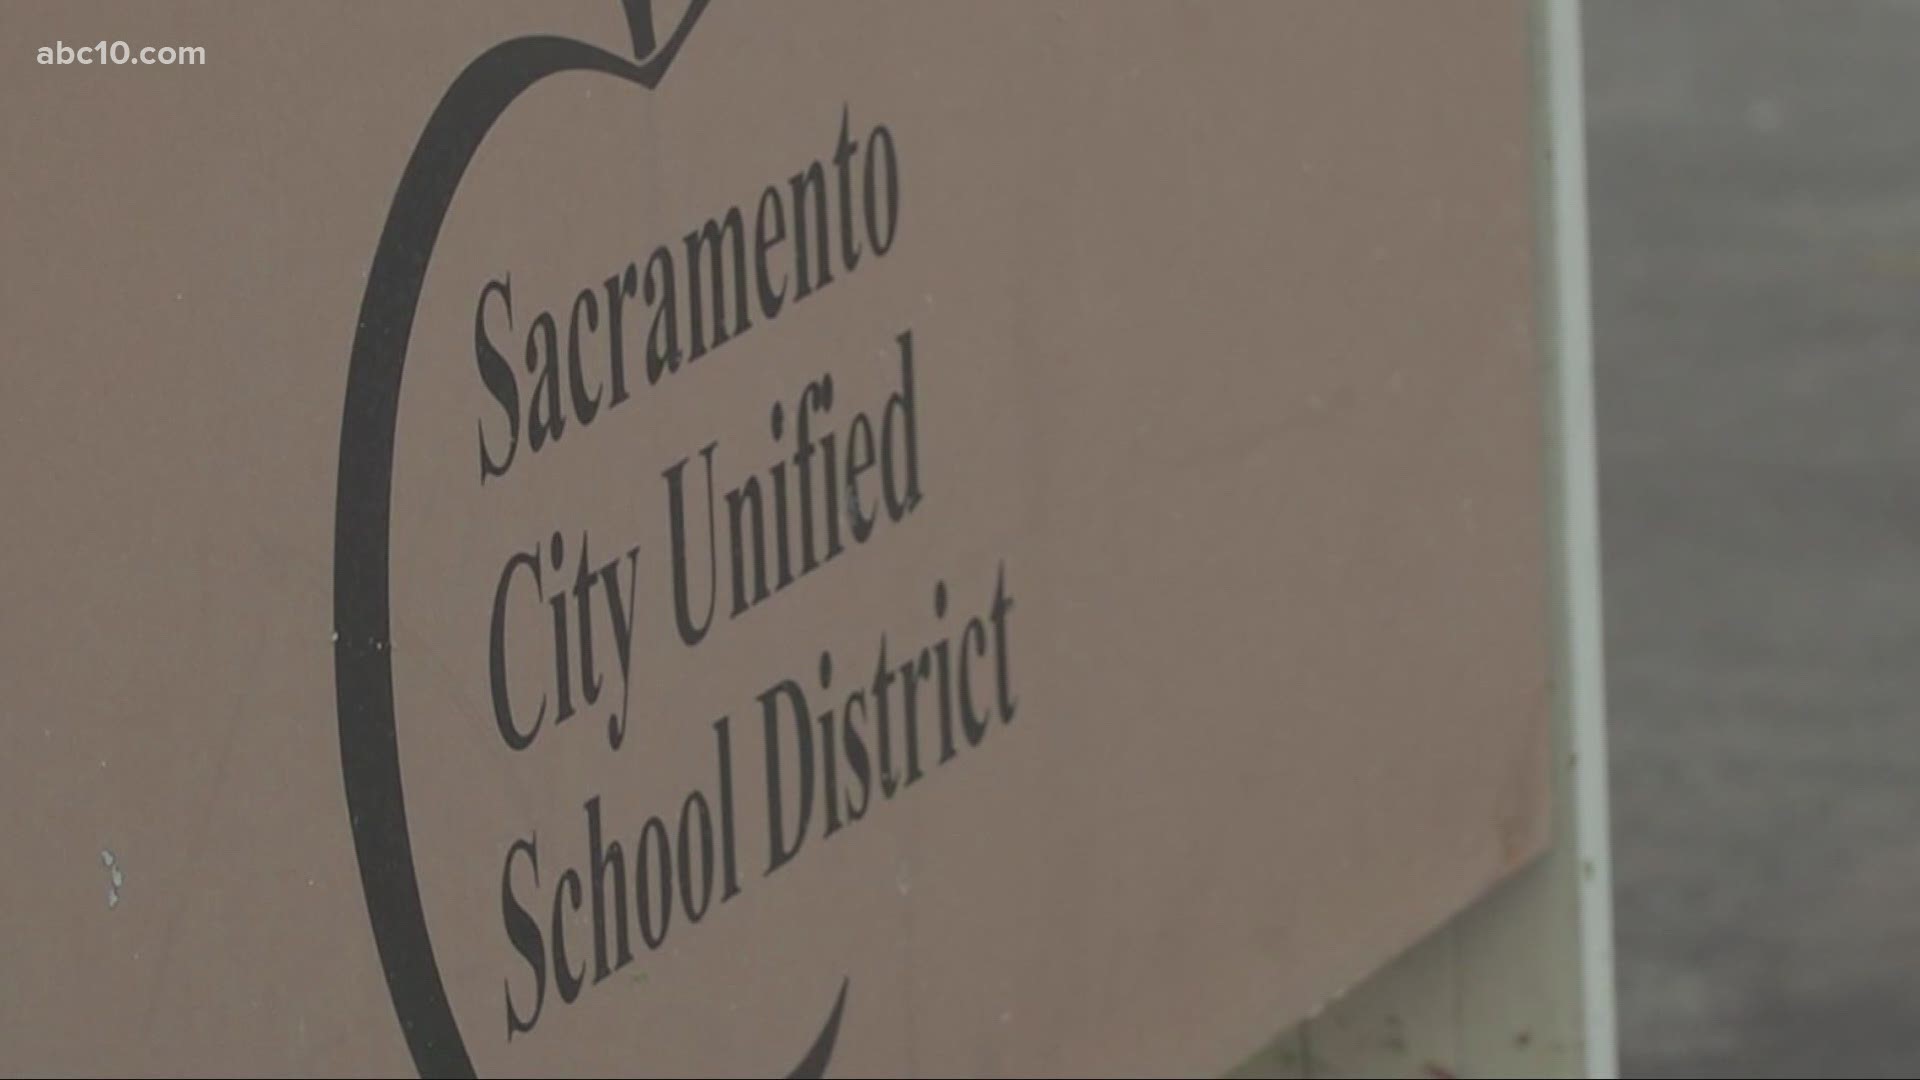 The clock is ticking for Sacramento City Unified School District to finalize reopening plans with the teachers union before school starts.